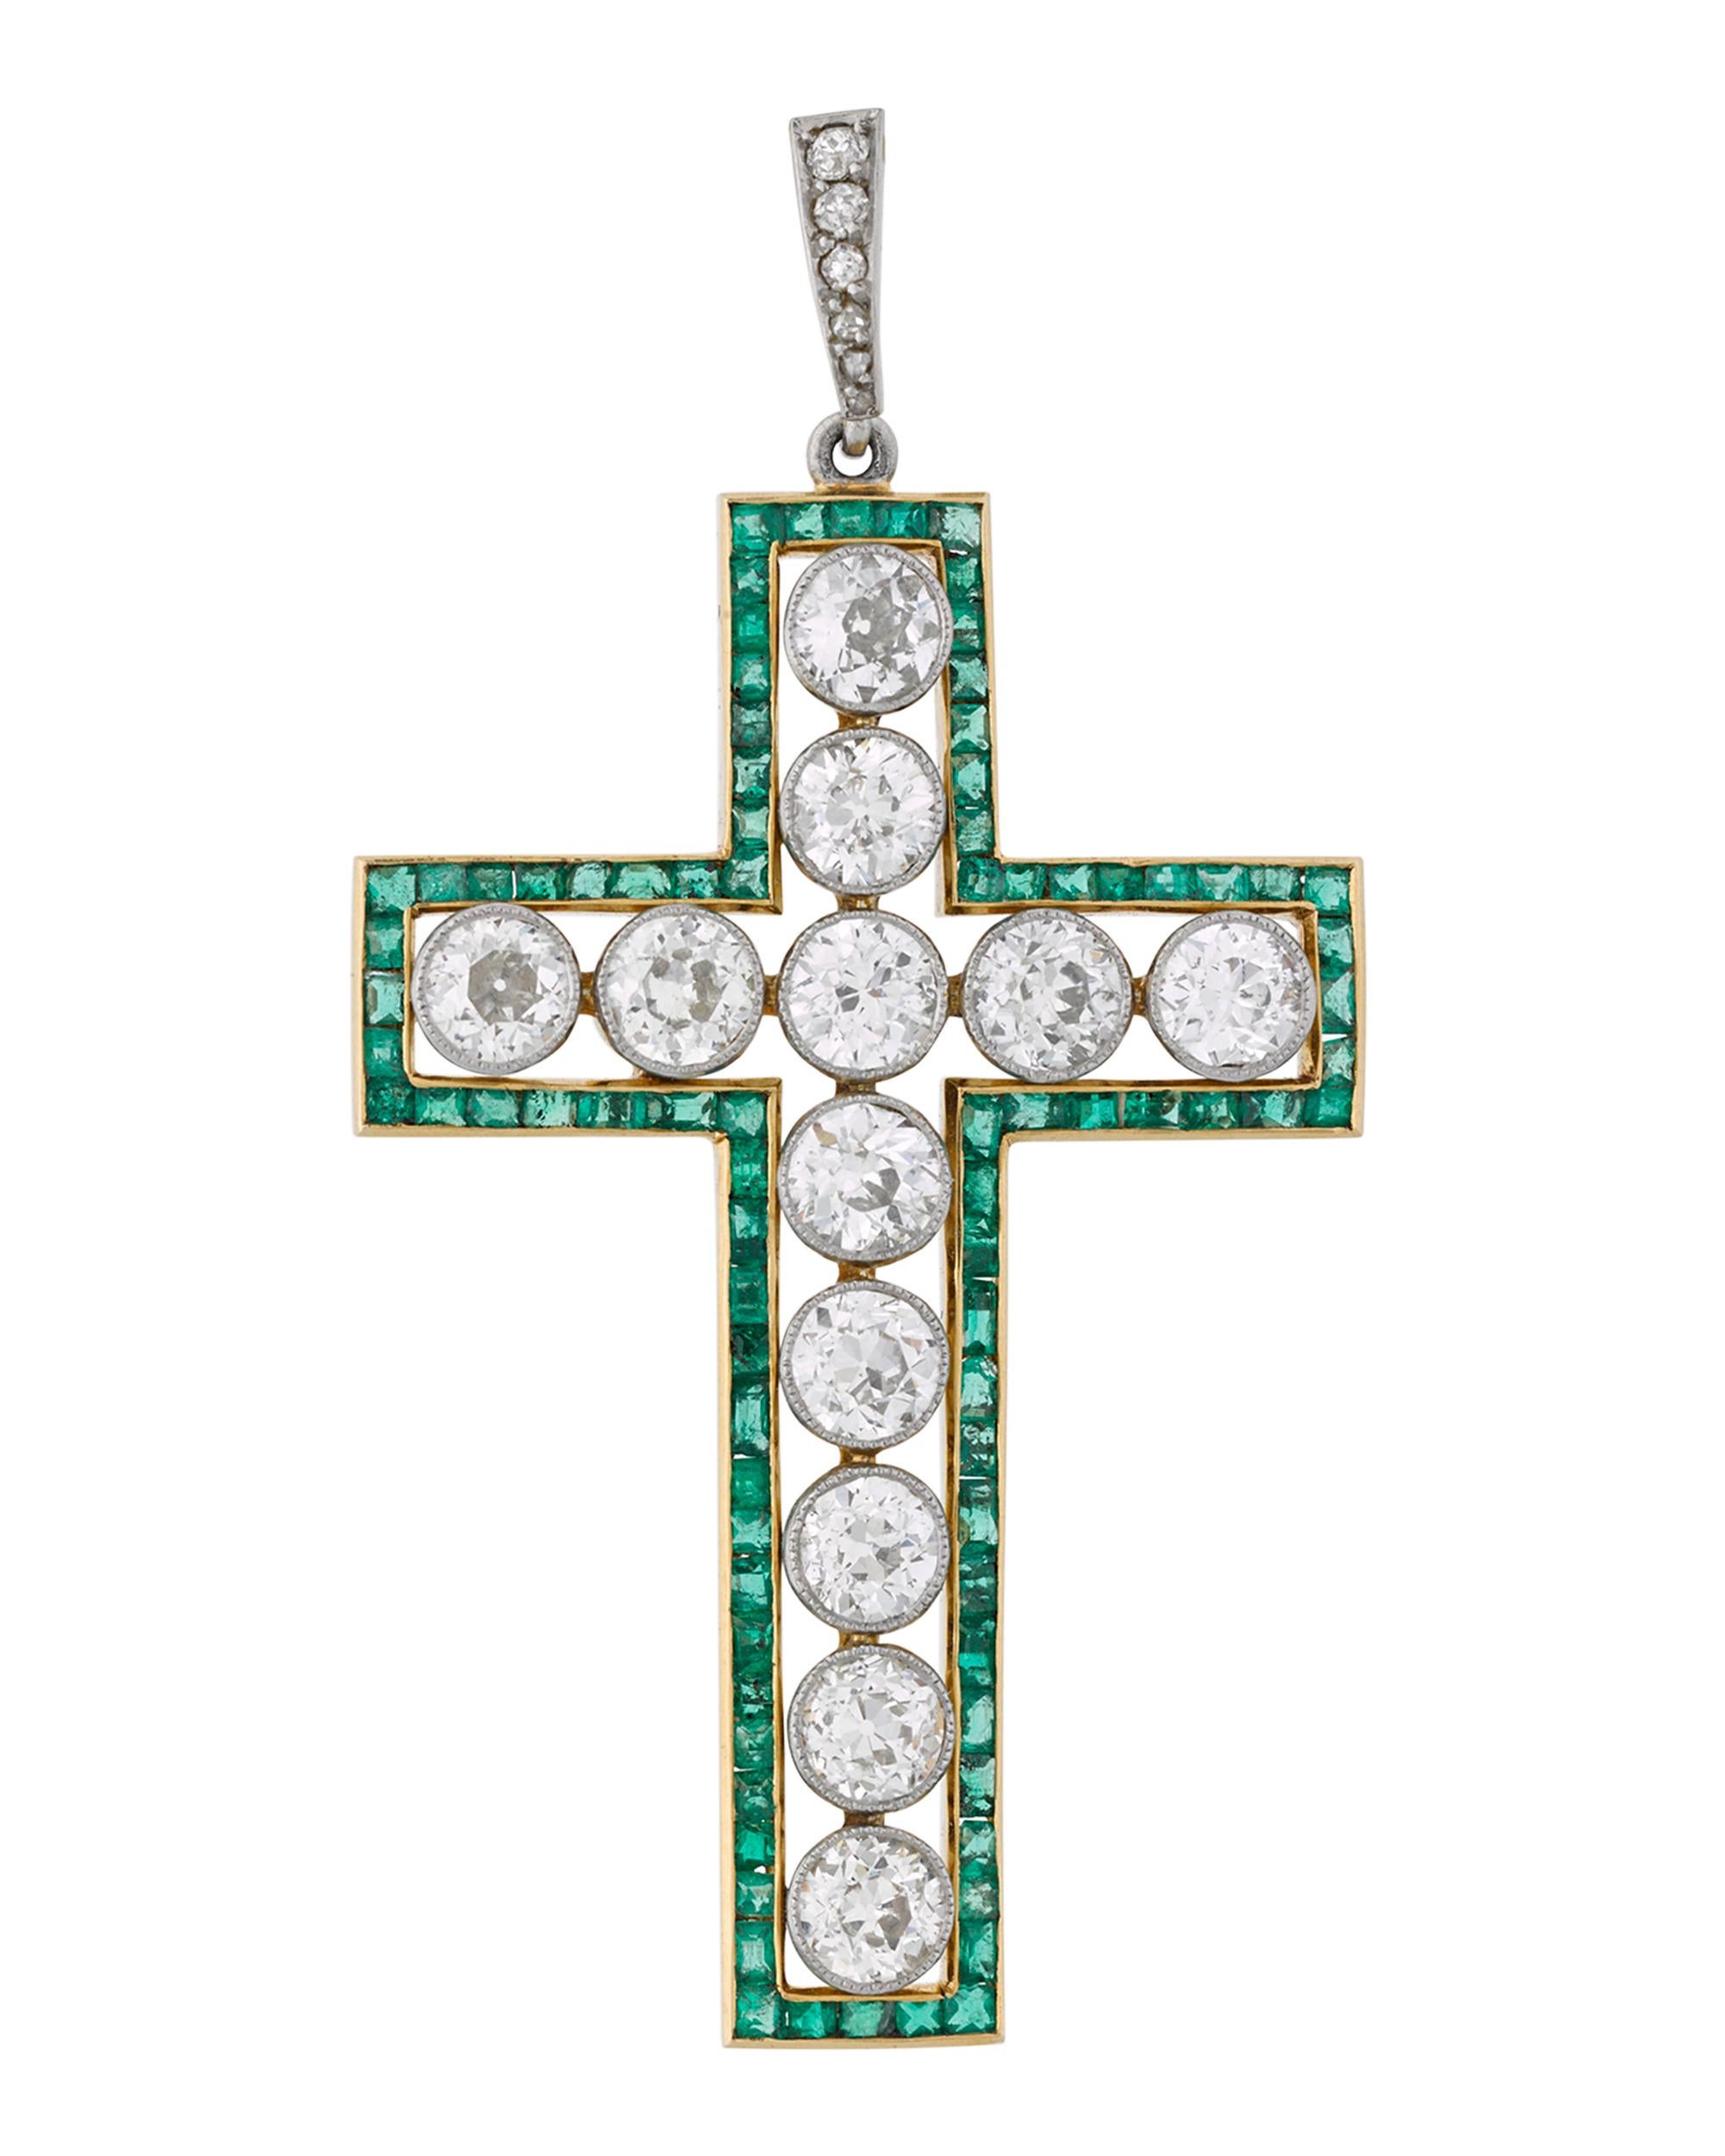 The twelve brilliant-cut round white diamonds in this incredible antique cross pendant weigh approximately 3.00 carats. Outlining these glistening jewels are beautiful emeralds that imbue this piece with a wonderful, vibrant green color. Set in 18K